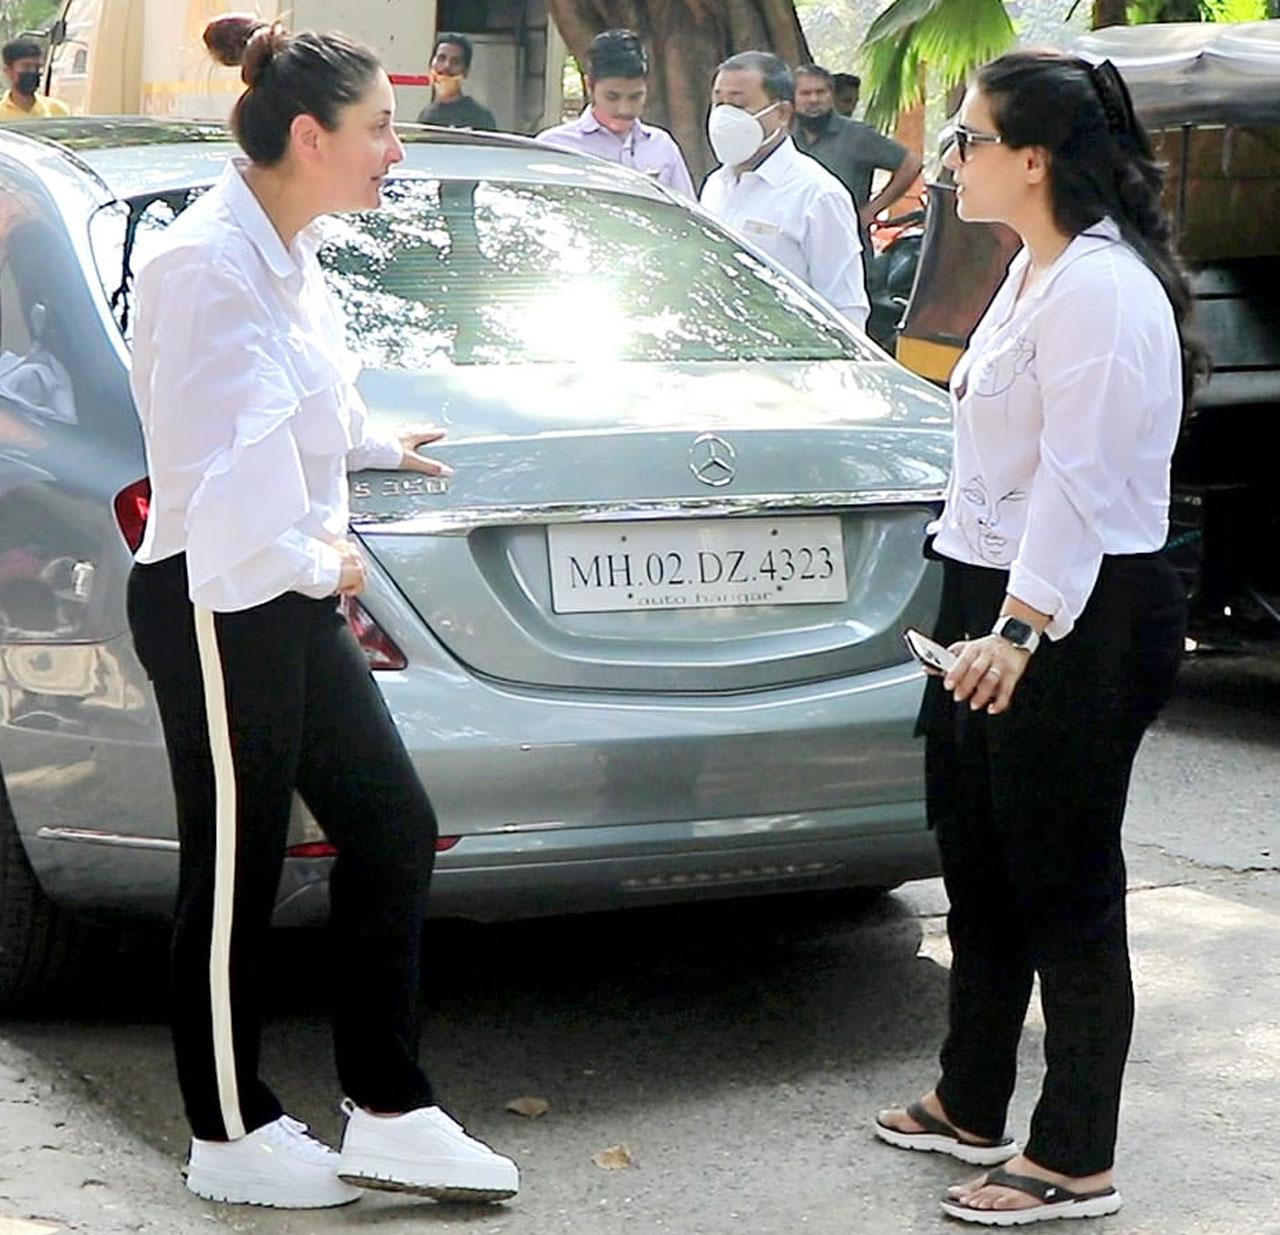 Kajol and Kareena Kapoor Khan's mini reunion on Thursday is all about nostalgia for their fans. The actors bumped into each other at Mehboob Studios in Mumbai today, and the glimpse of their brief meeting was captured by none other than Bombay's eagle-eyed paparazzi.